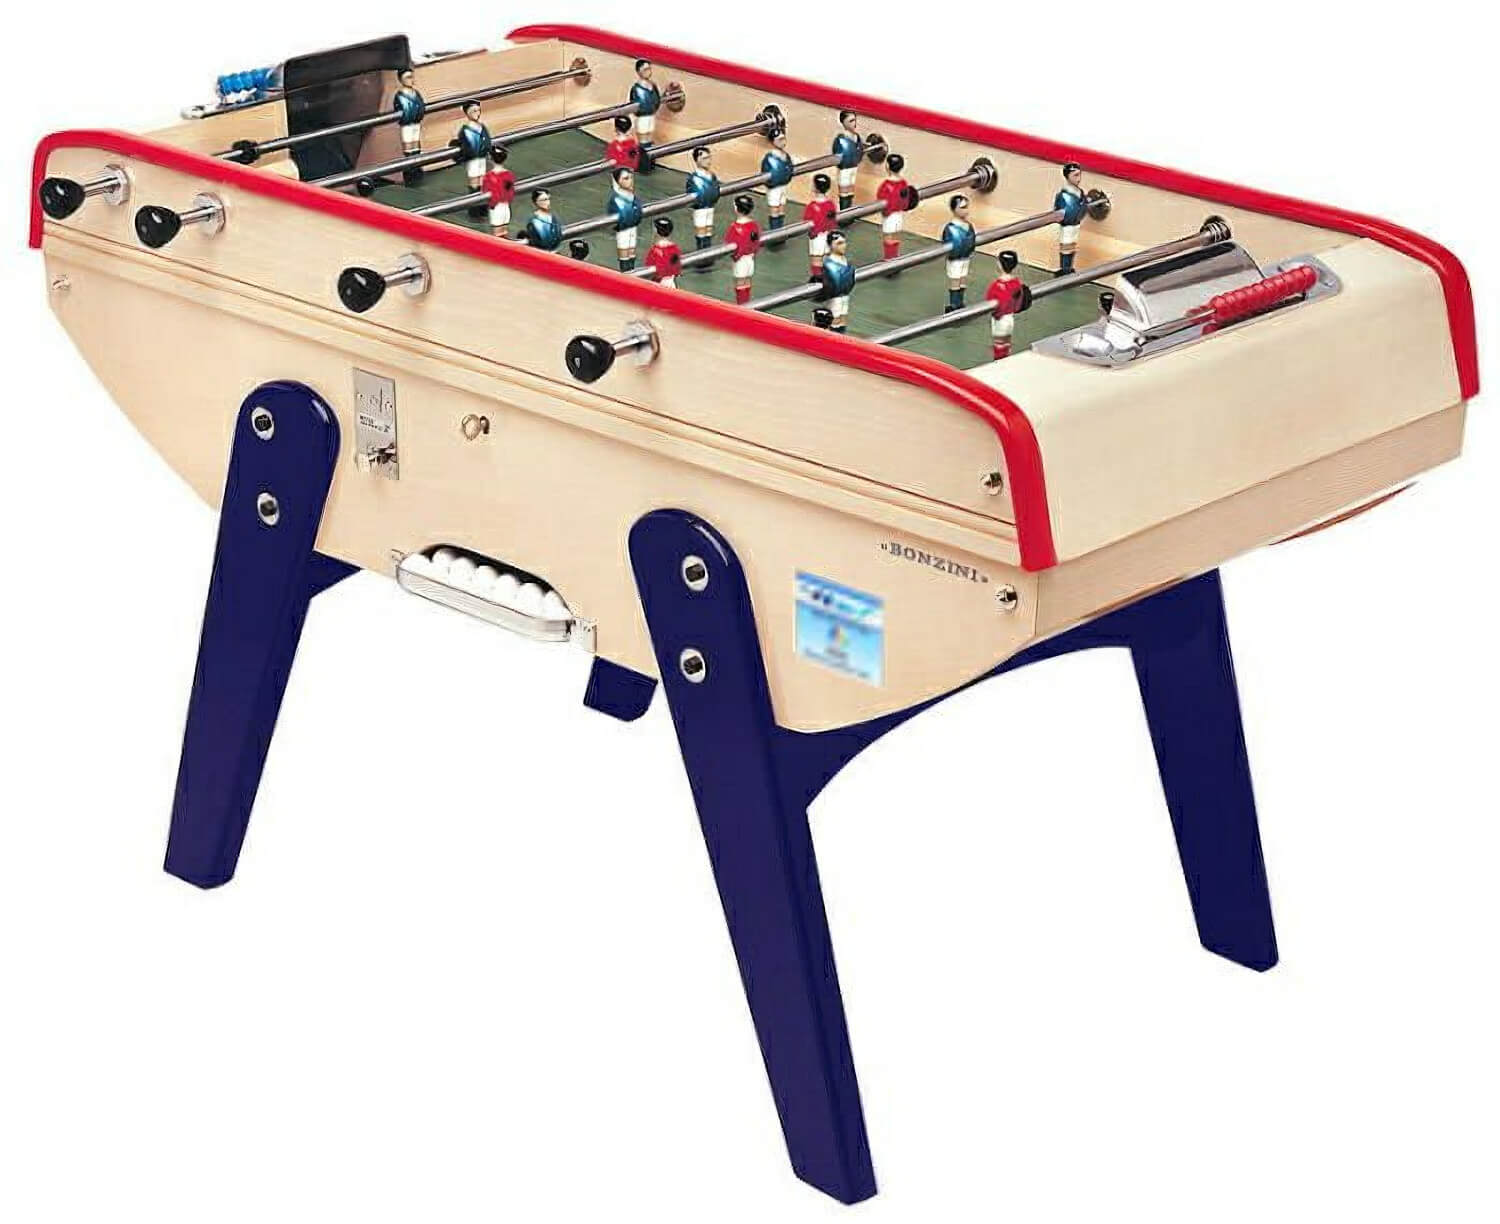 used coin operated soccer table for sale